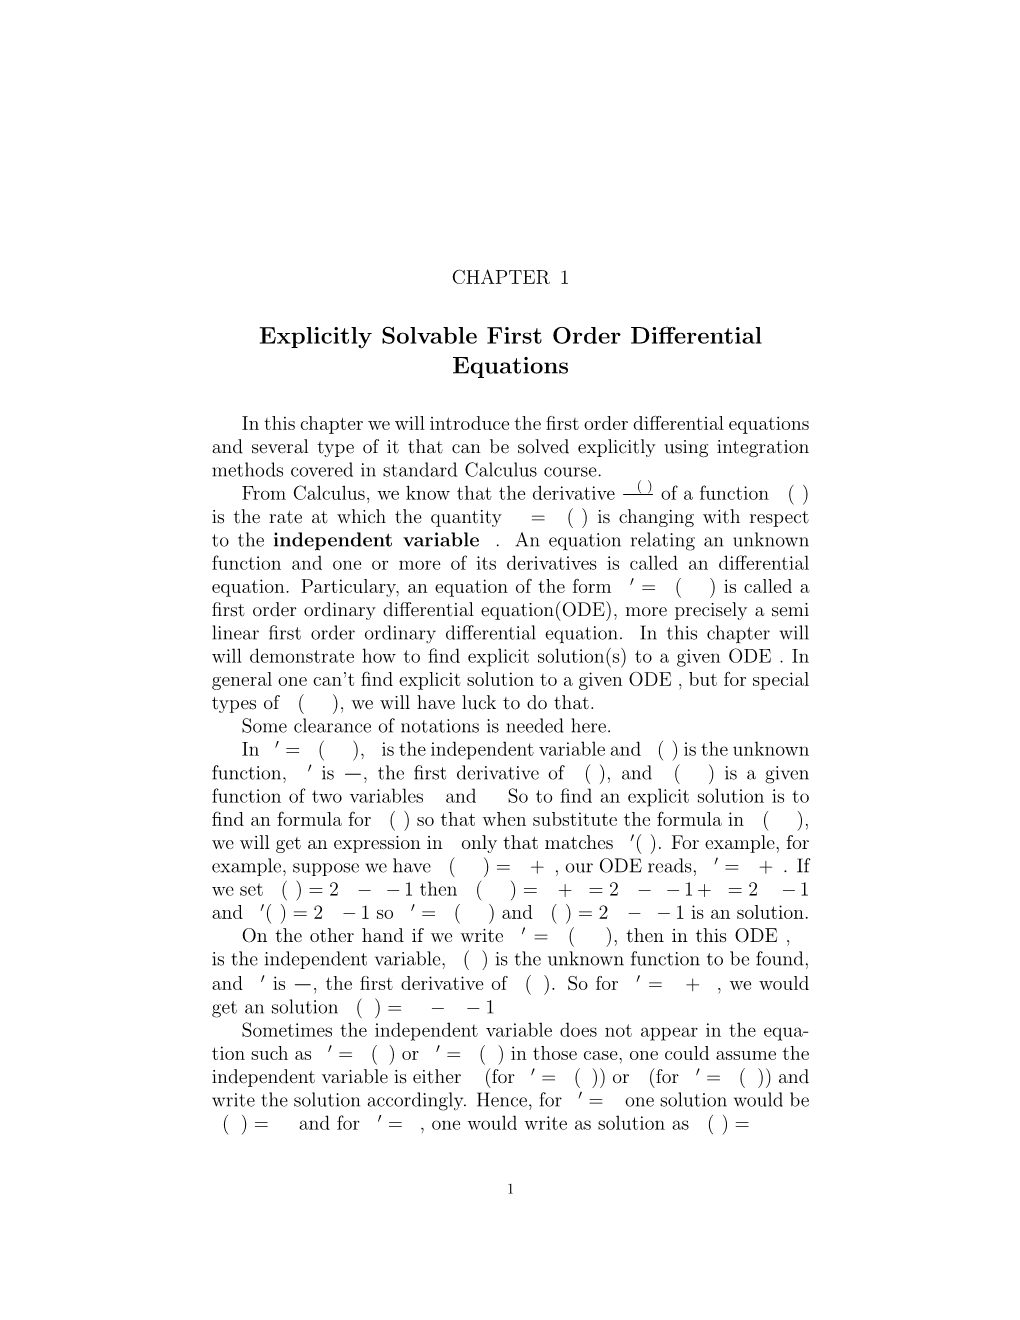 Explicitly Solvable First Order Differential Equations